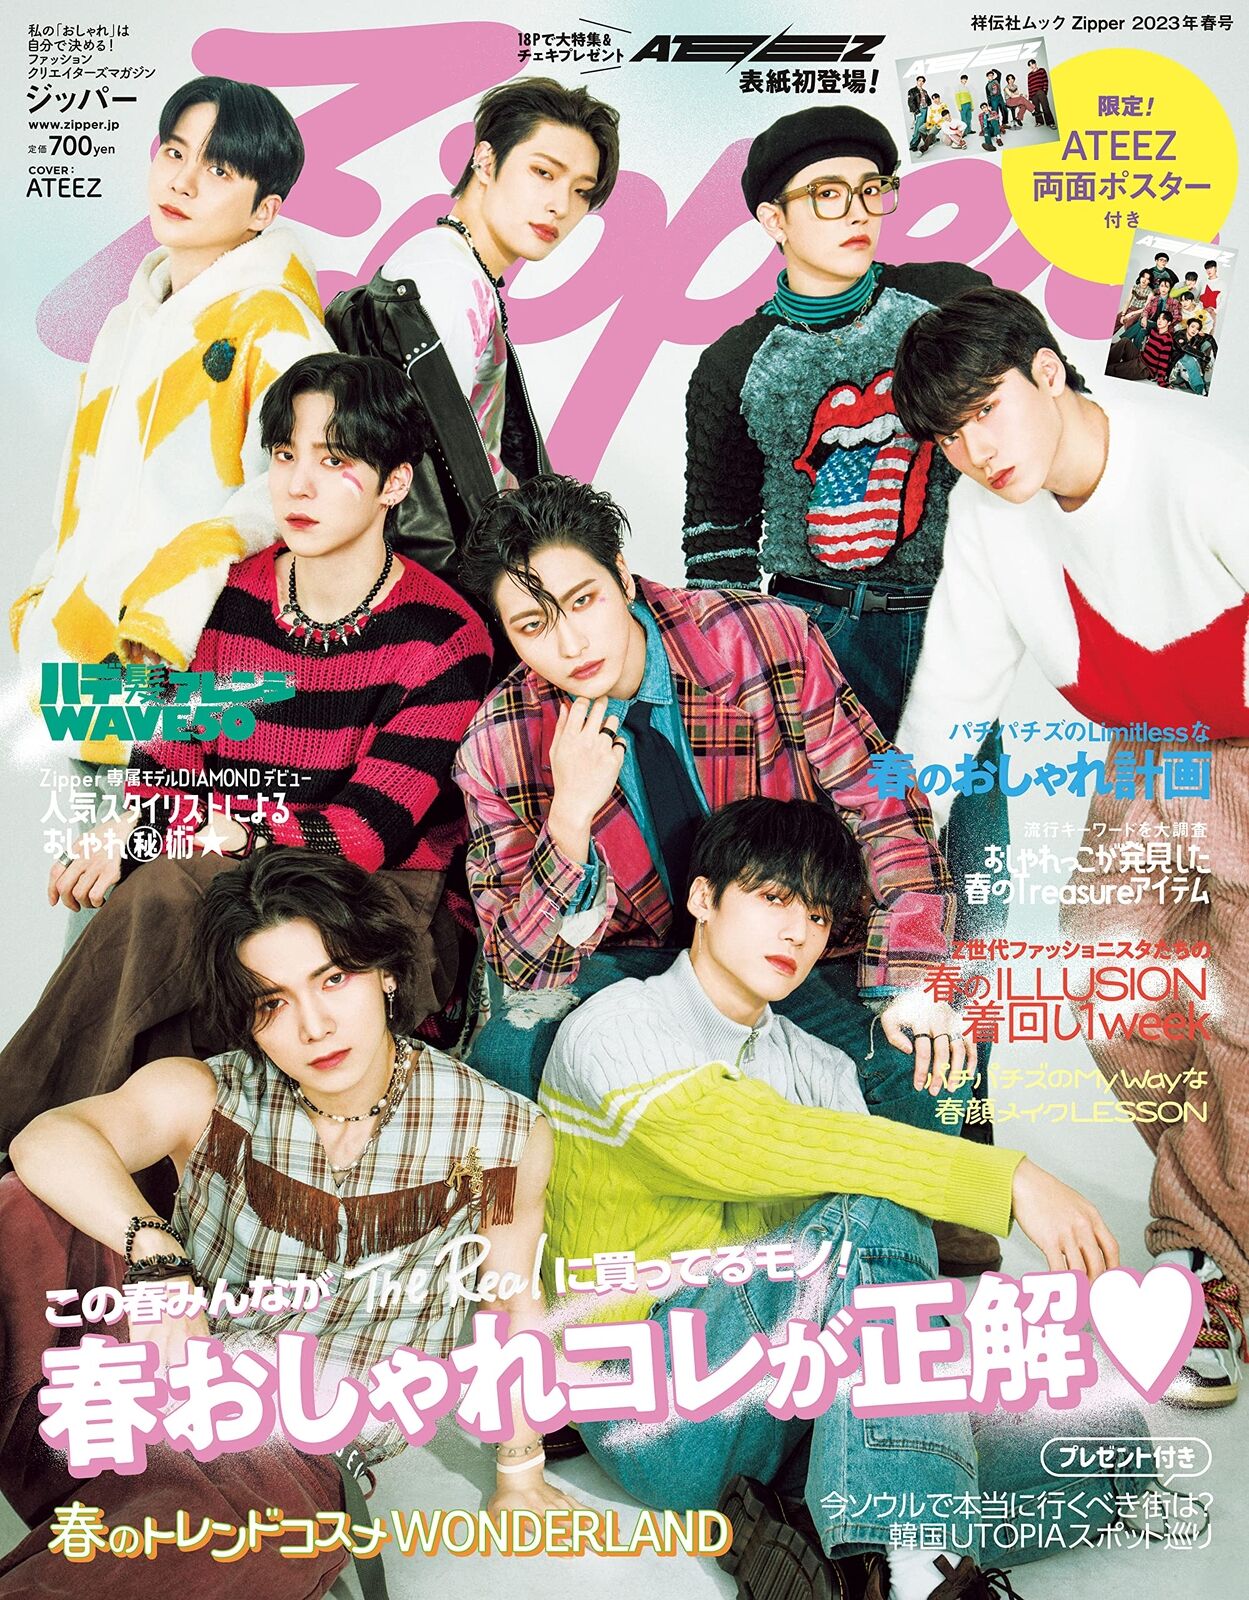 Zipper 2023 SPING issue With ATEEZ Poster Fashion Beauty Trend Japan Magazine